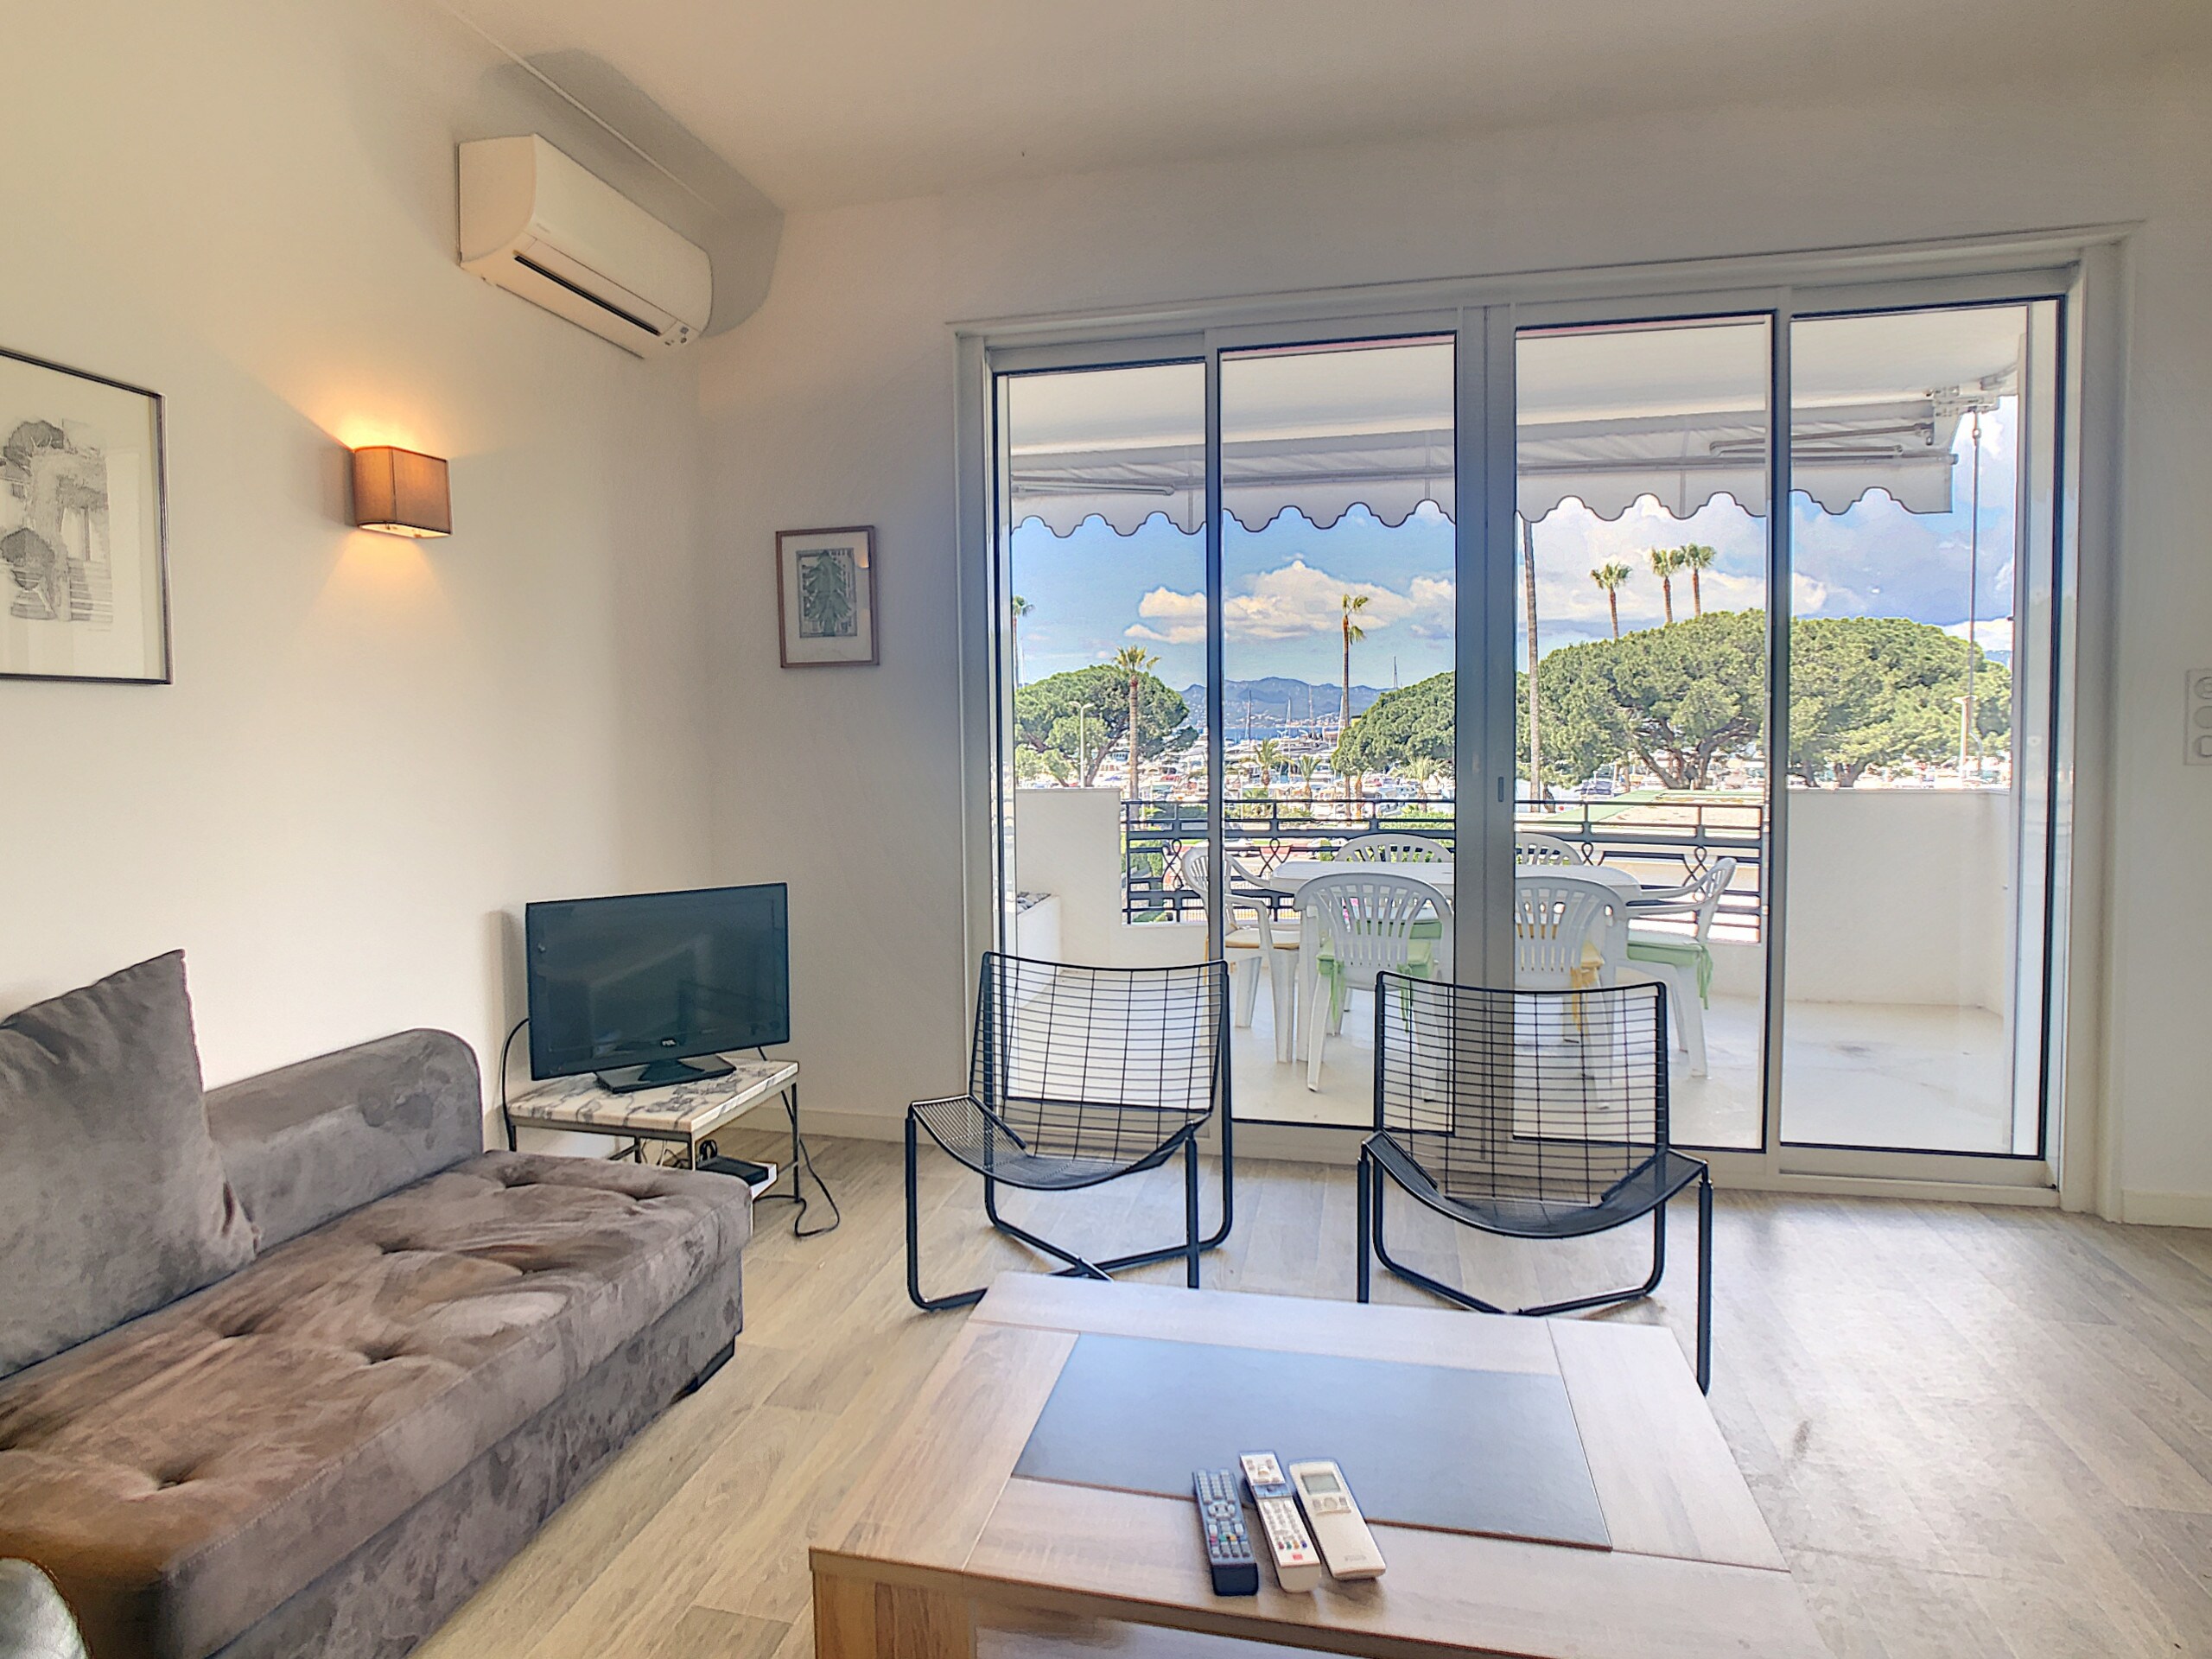 Property Image 2 - The apartment in Cannes has 3 bedrooms and capacity for 6 persons. 